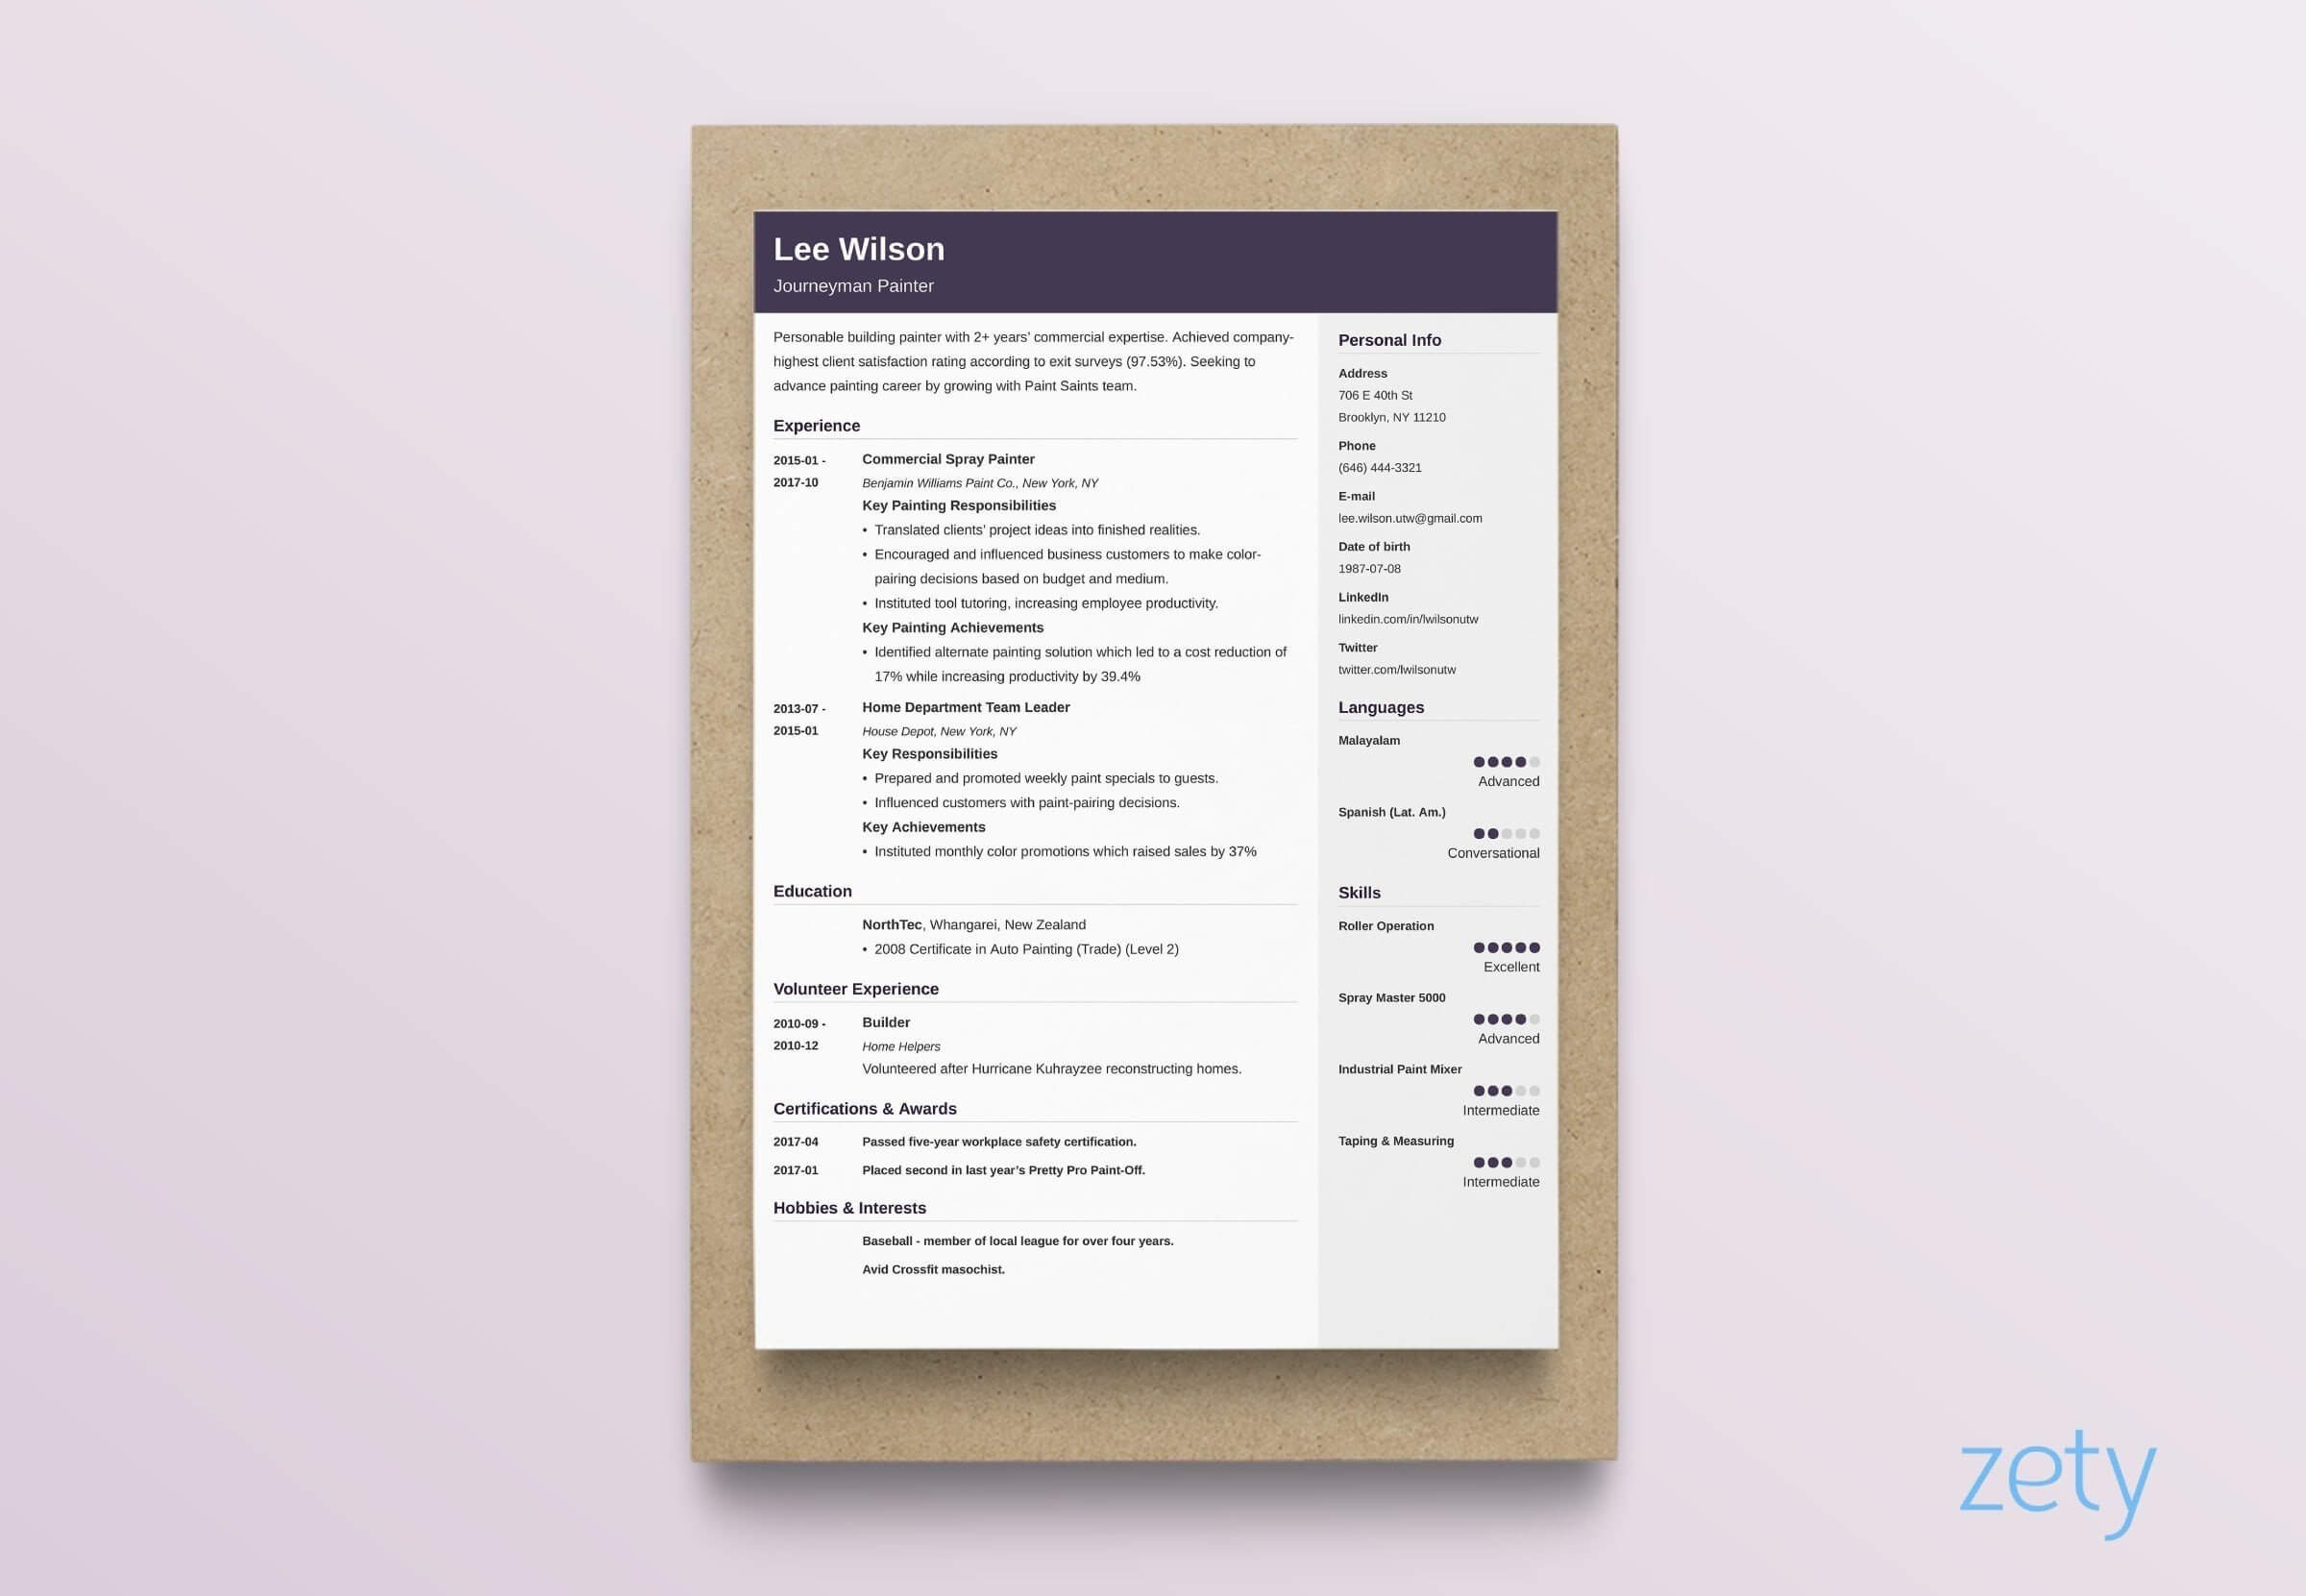 Curriculum Vitae (Cv) Format [20+ Examples & Tips] With Blank Table Of Contents Template Pdf